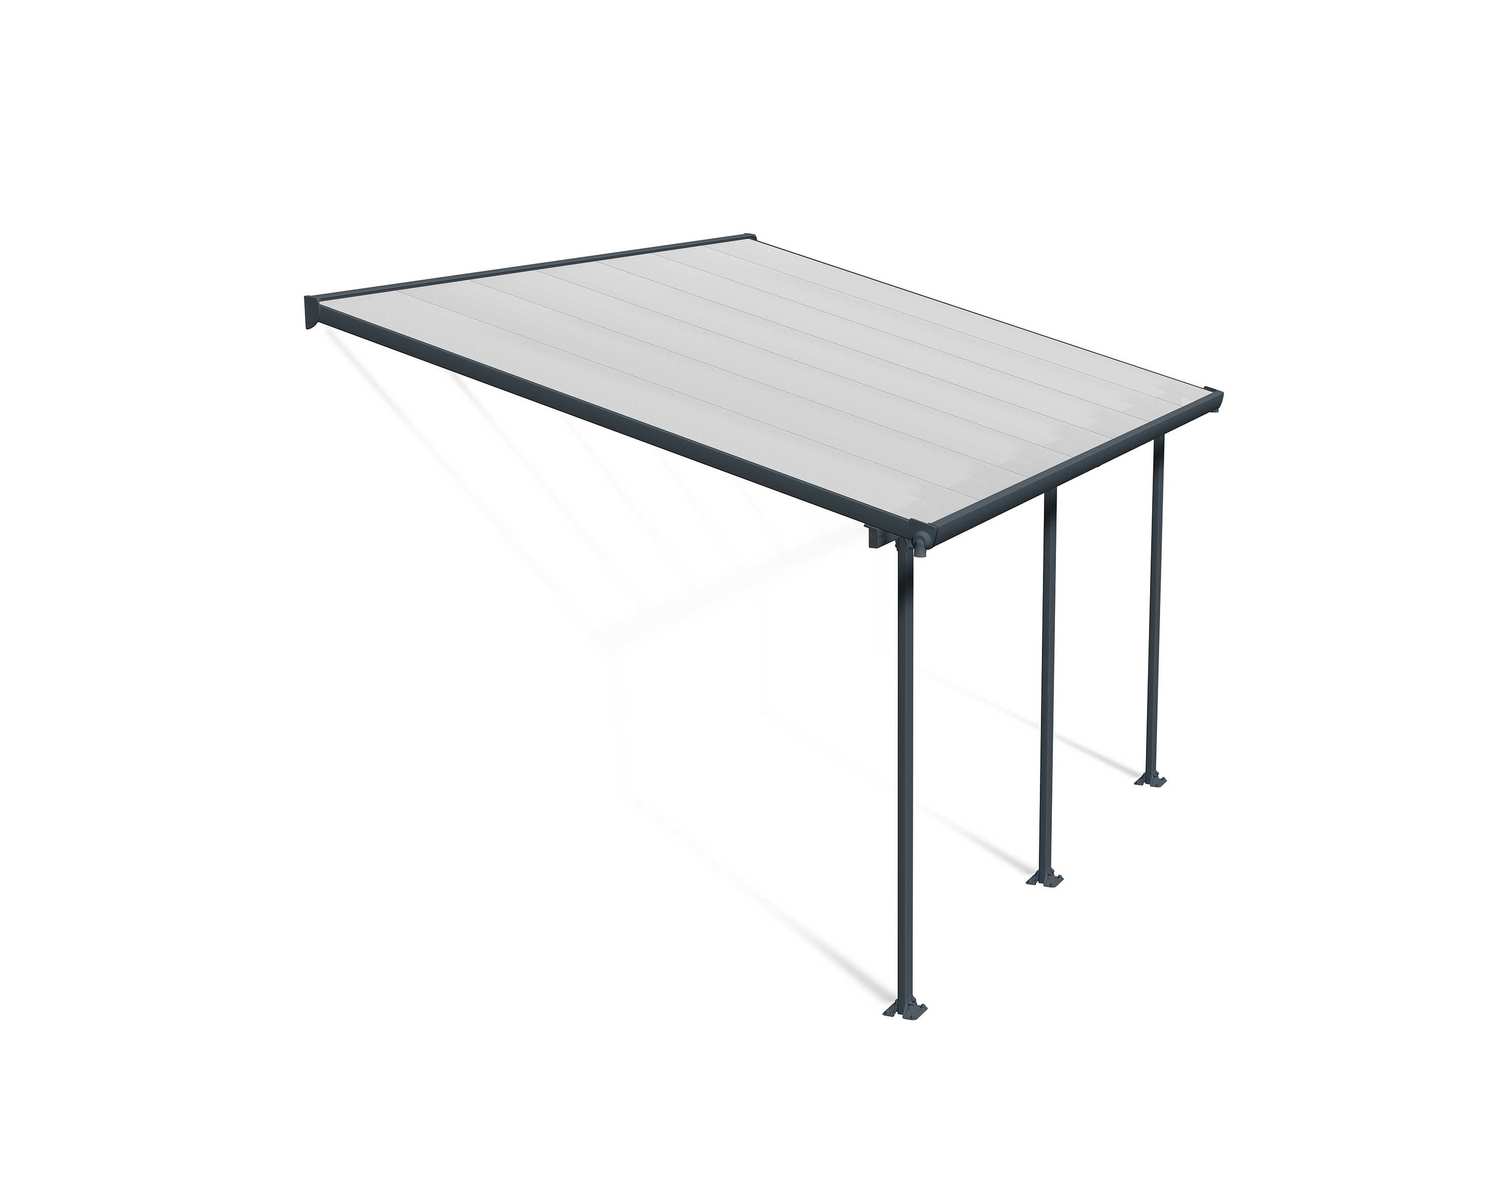 Patio Cover Kit Feria 3 ft. x 4.25 ft. Grey Structure & Clear Multi Wall Glazing